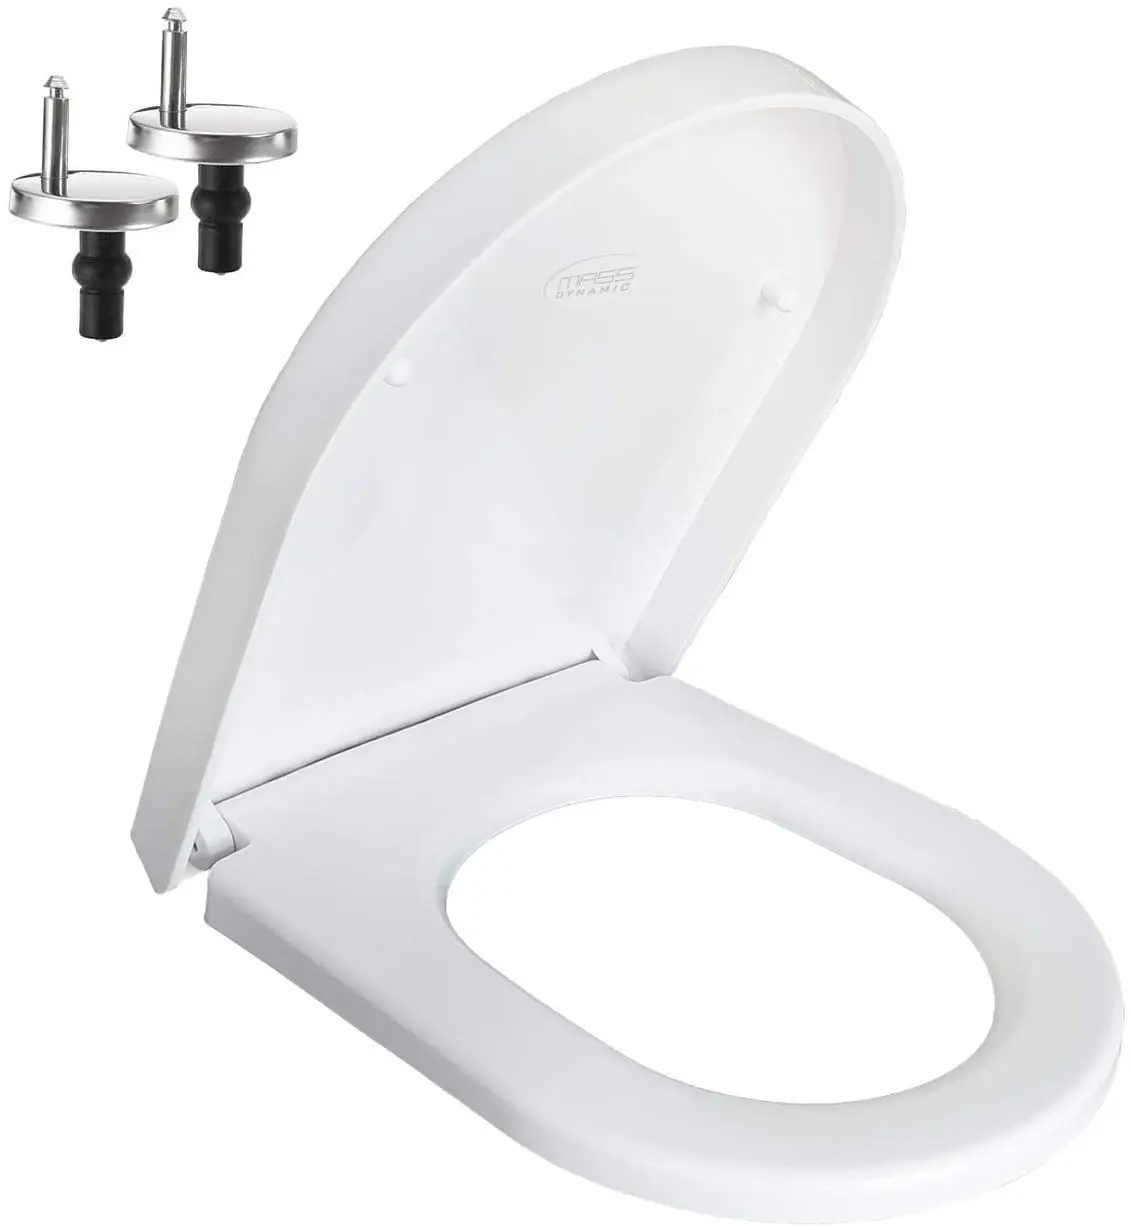 Heavy Duty Comfort Toilet Seat White Soft Close Quick Release Top Fitting Hinges 